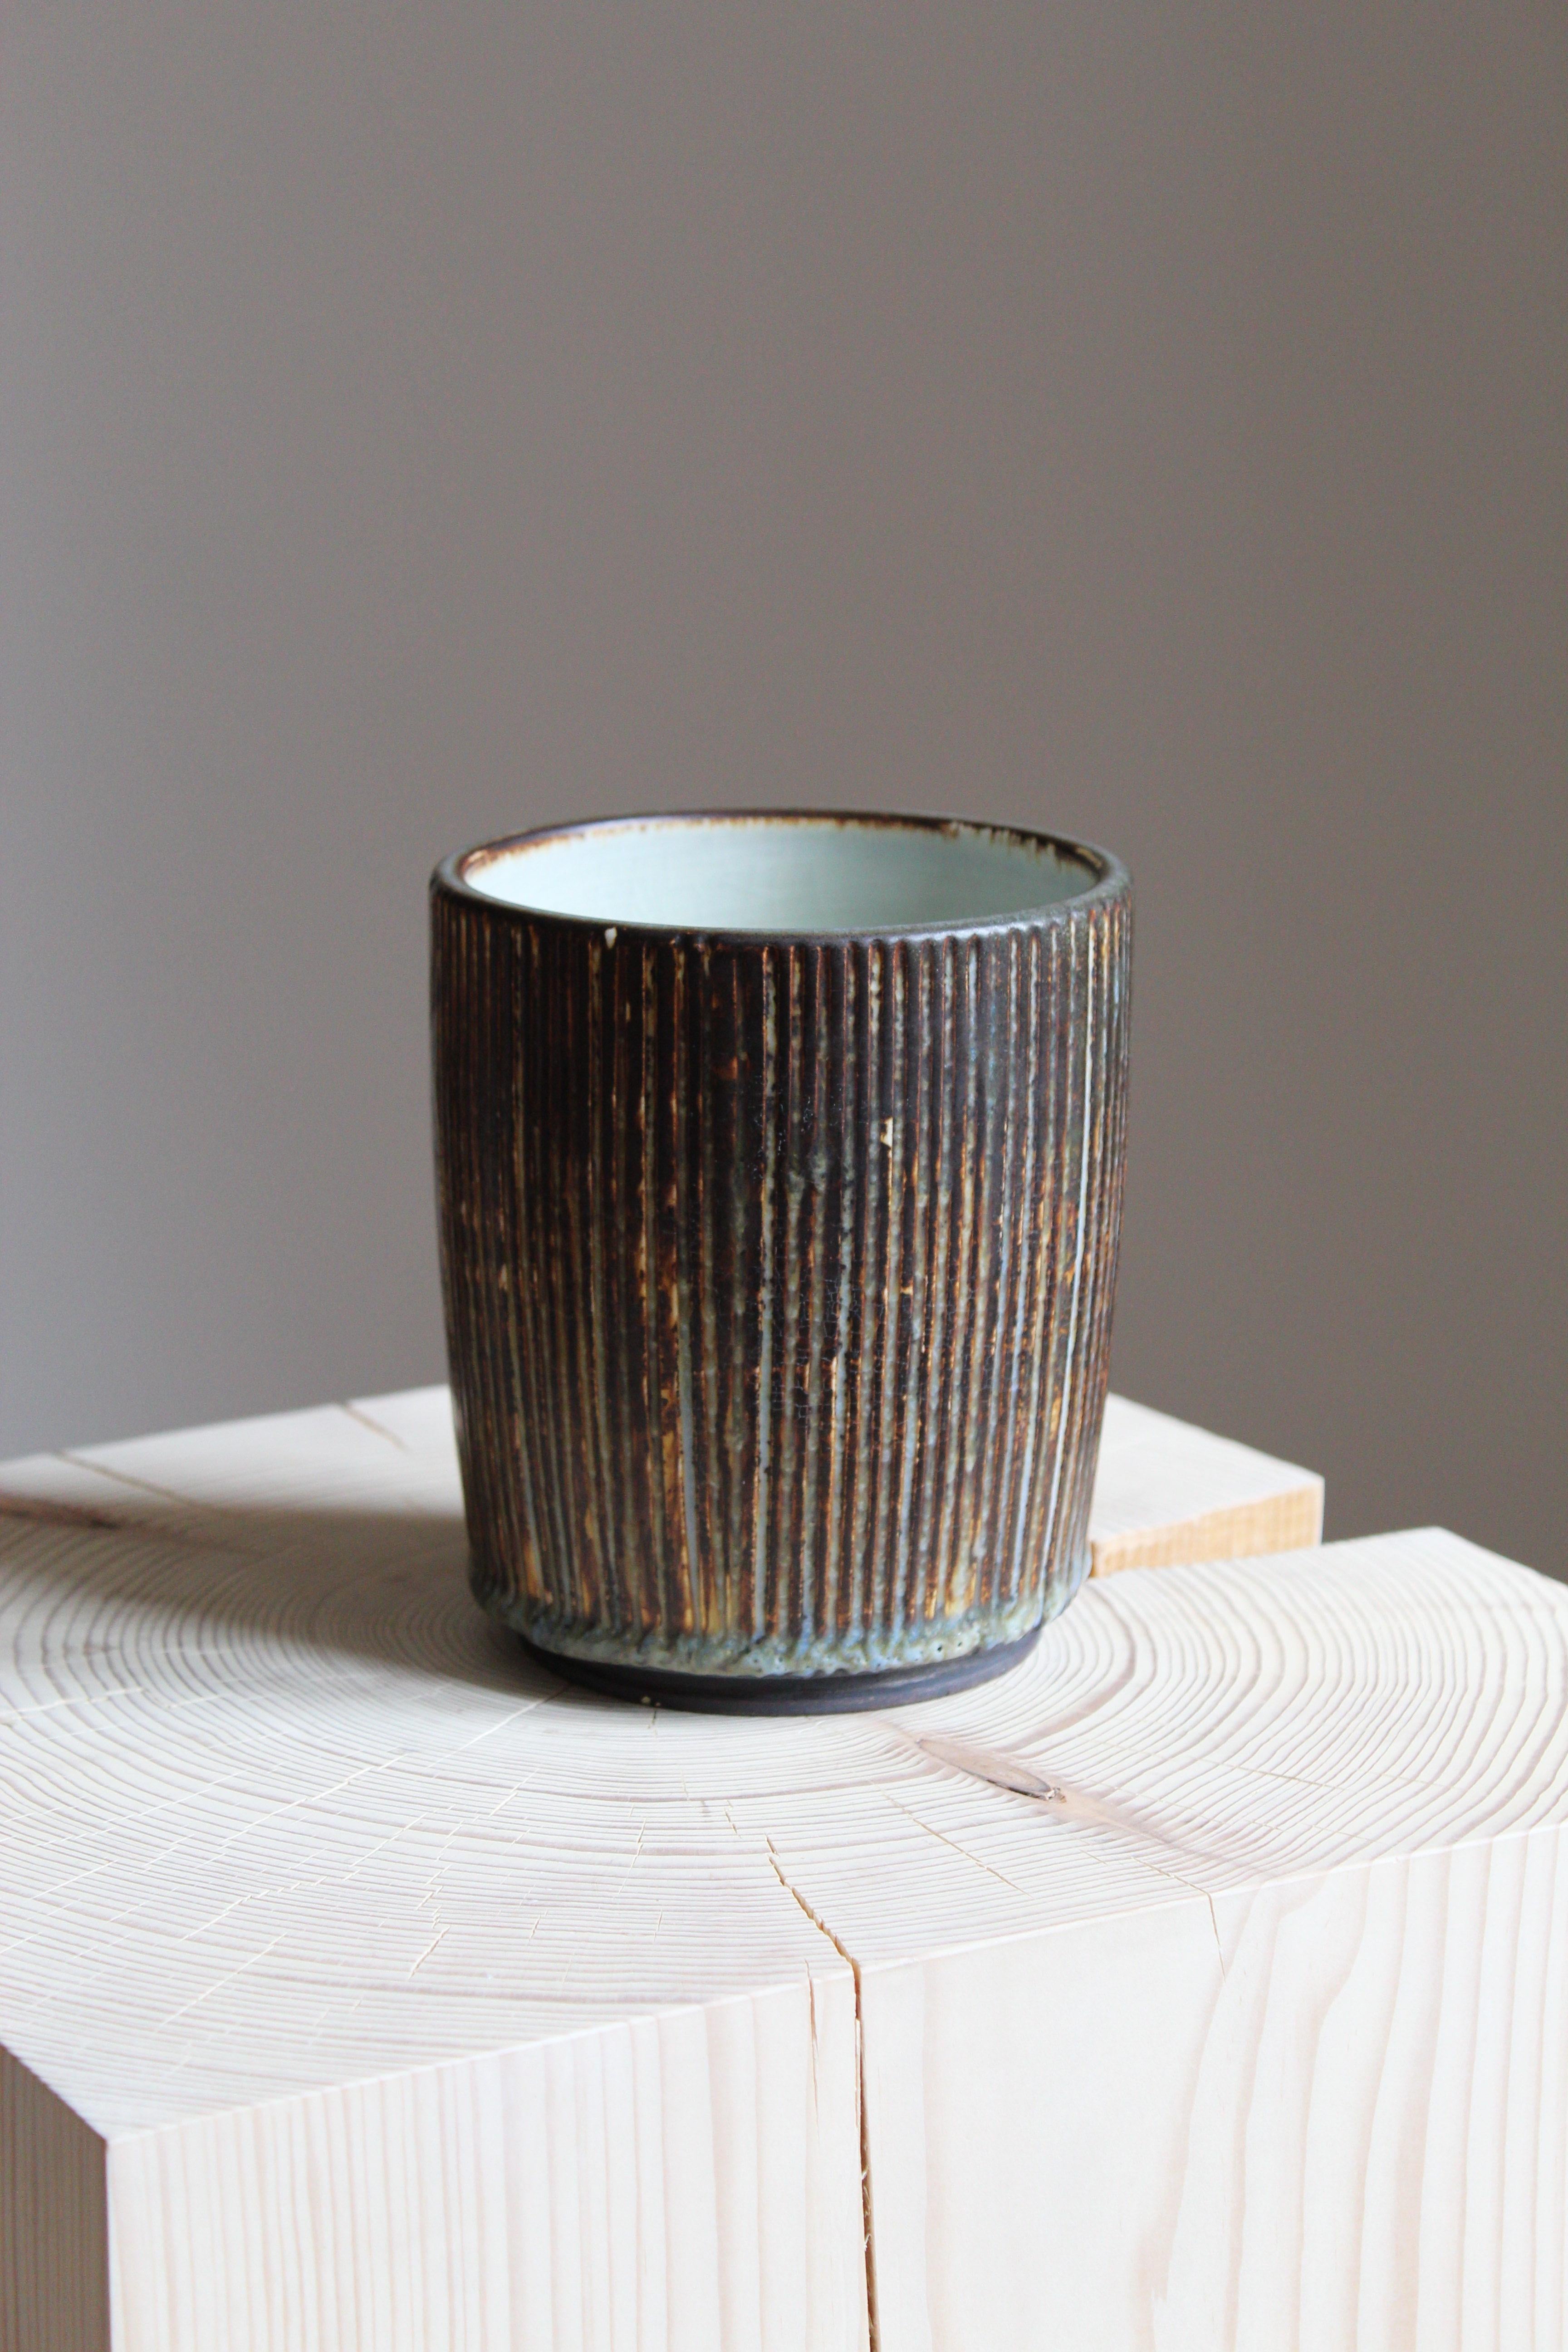 A small vase, designed by Getrud Lönegren. Produced by Rörstrand. Stamped. Features a highly artistic glaze.

Other designers of the period include WIlhelm Kåge, Stig Lindberg, Axel Salto, Arne Bang, and Gunnar Nylund.